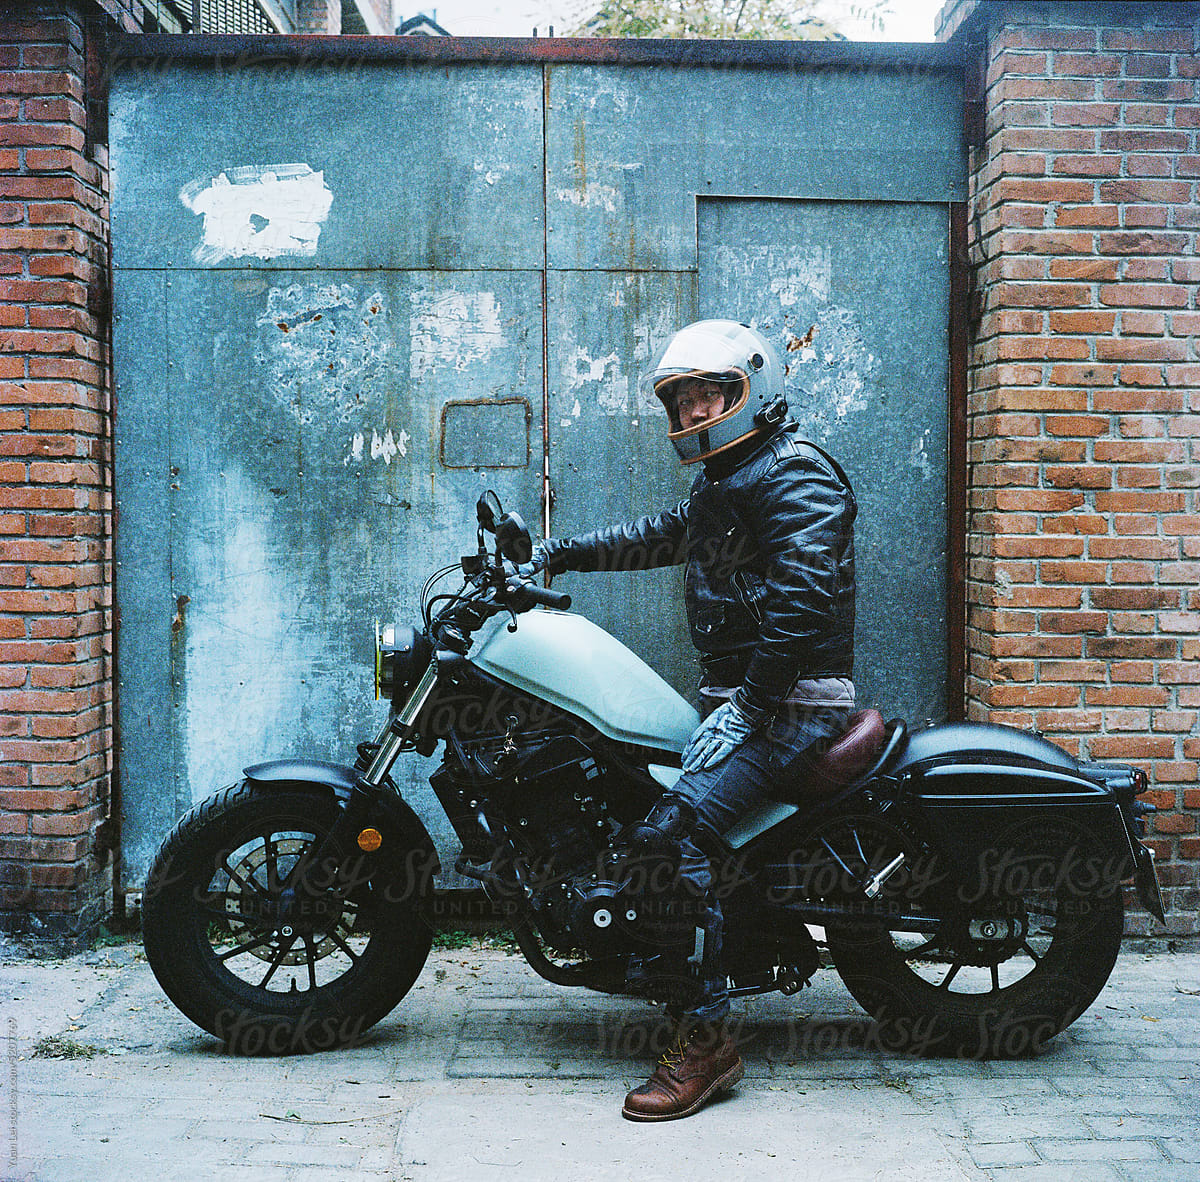 A man in black leather on a motorcycle.